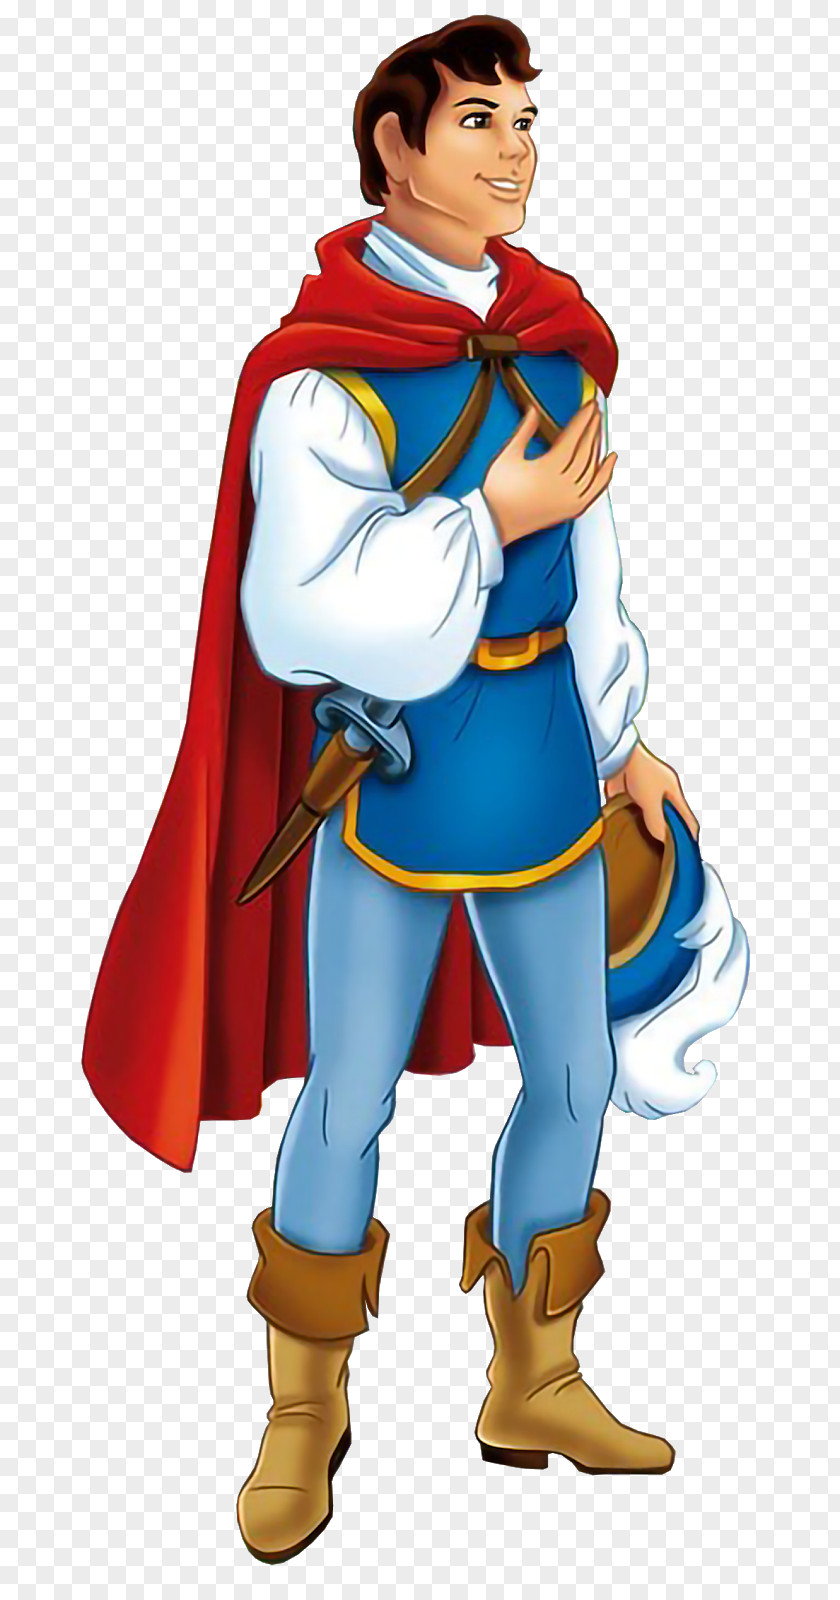 Snow White And The Seven Dwarfs Prince Charming Pinocchio Superman PNG